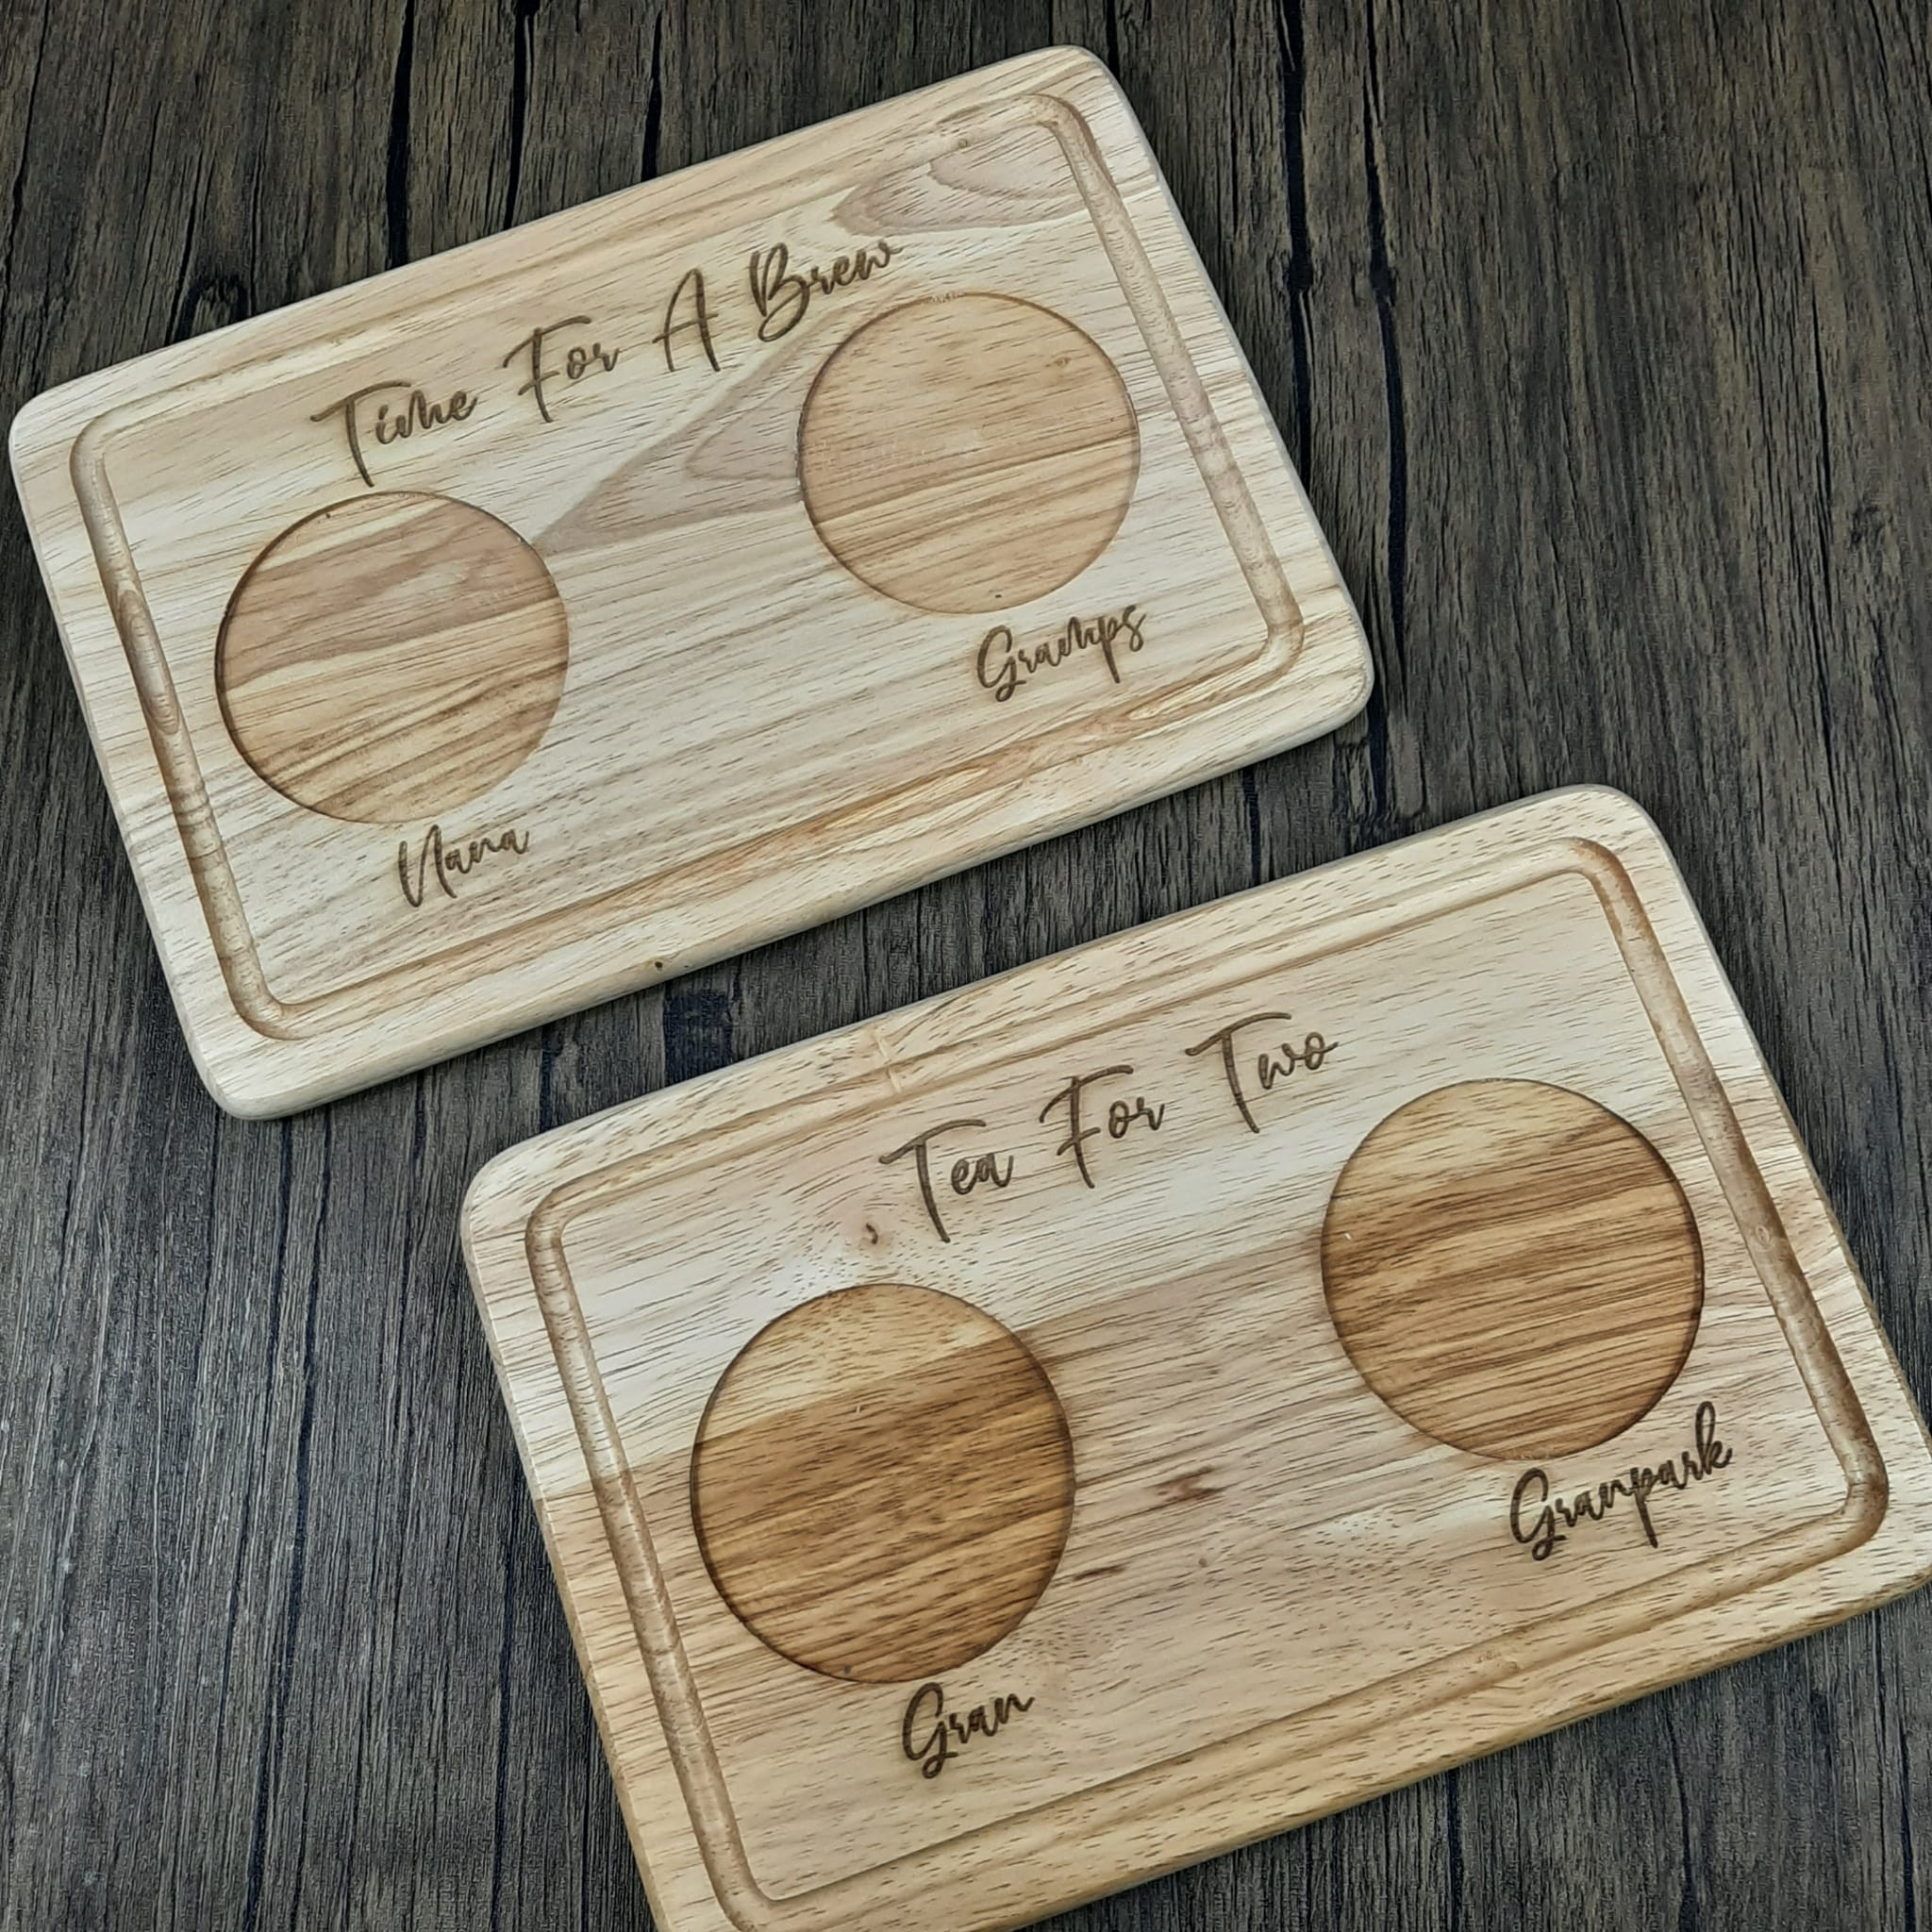 Tea For Two Mug Board ideal personalised gift for couples, especially Great for parents and grandparent gift. Personalised and custom with drink recesses a